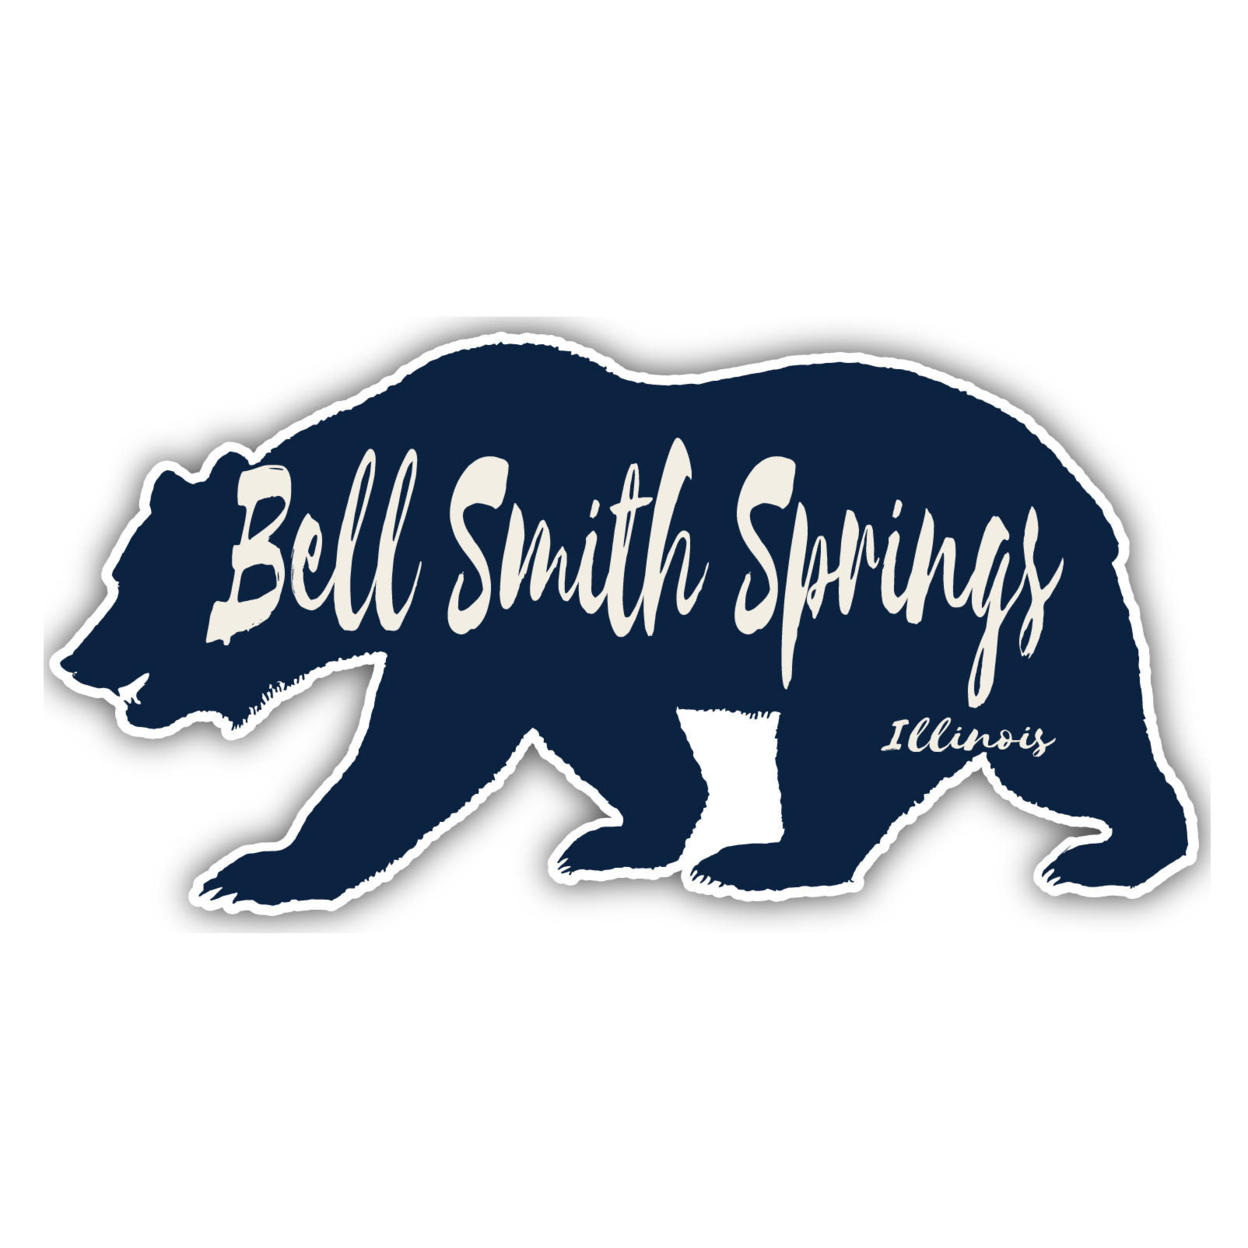 Bell Smith Springs Illinois Souvenir Decorative Stickers (Choose Theme And Size) - Single Unit, 2-Inch, Bear